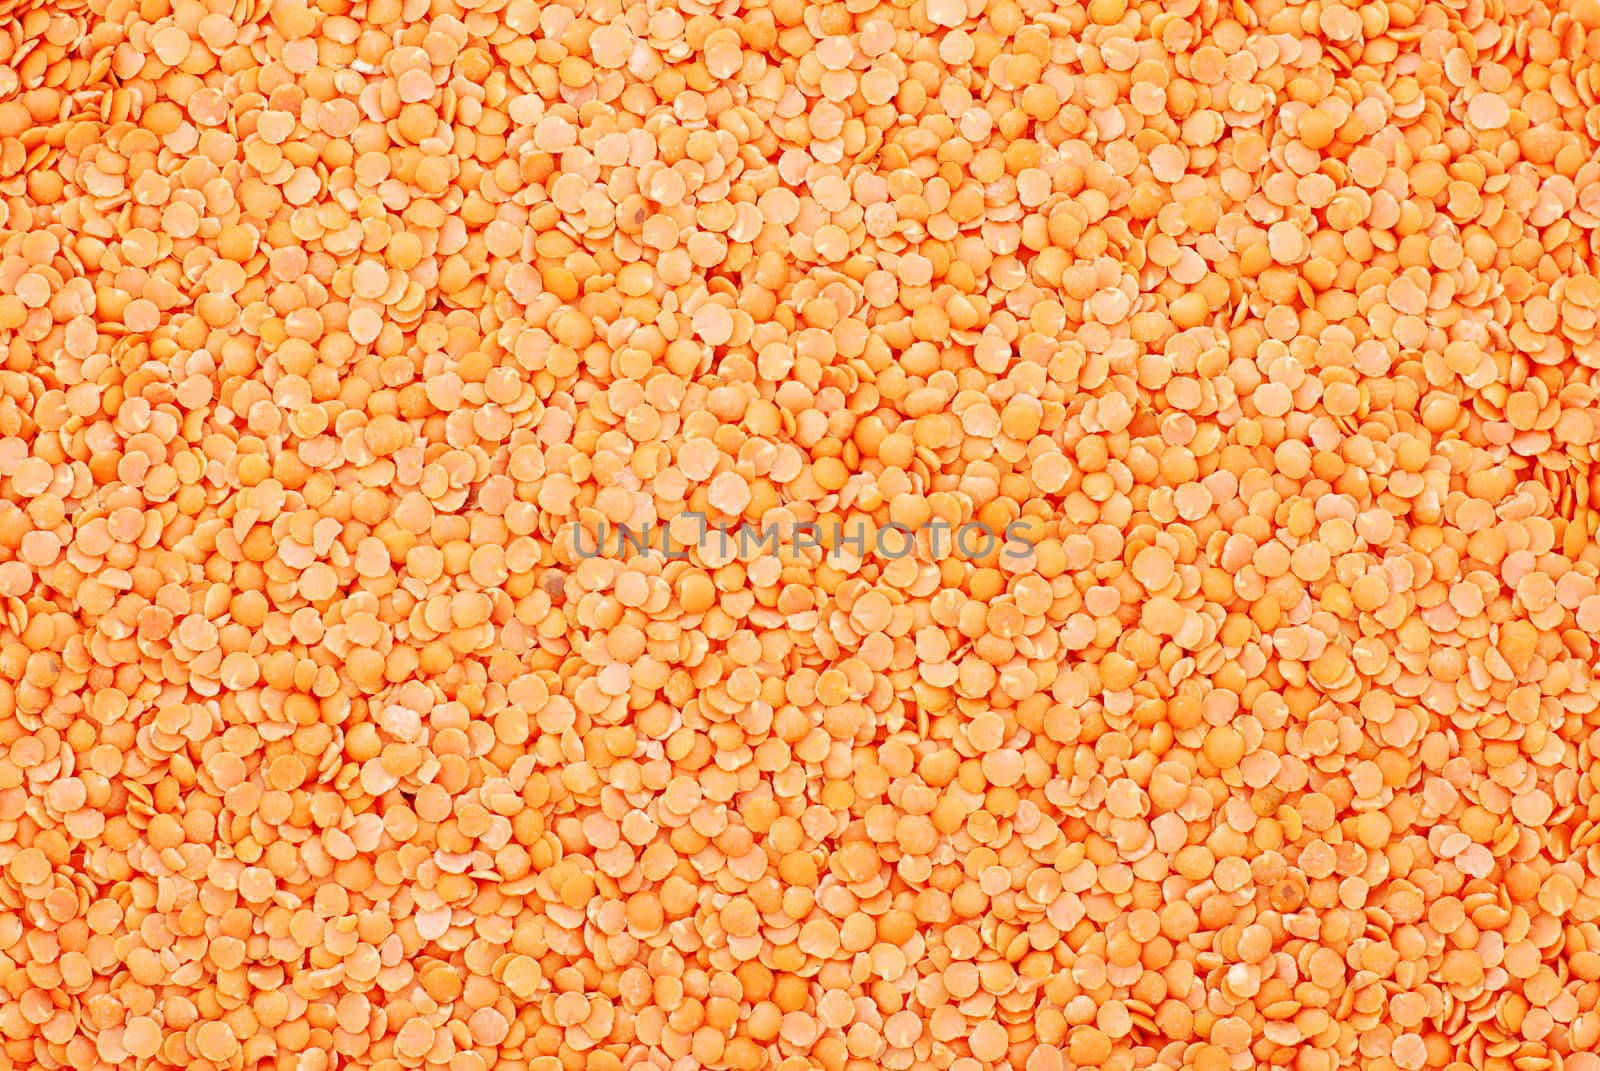 Red lentils abstract background texture